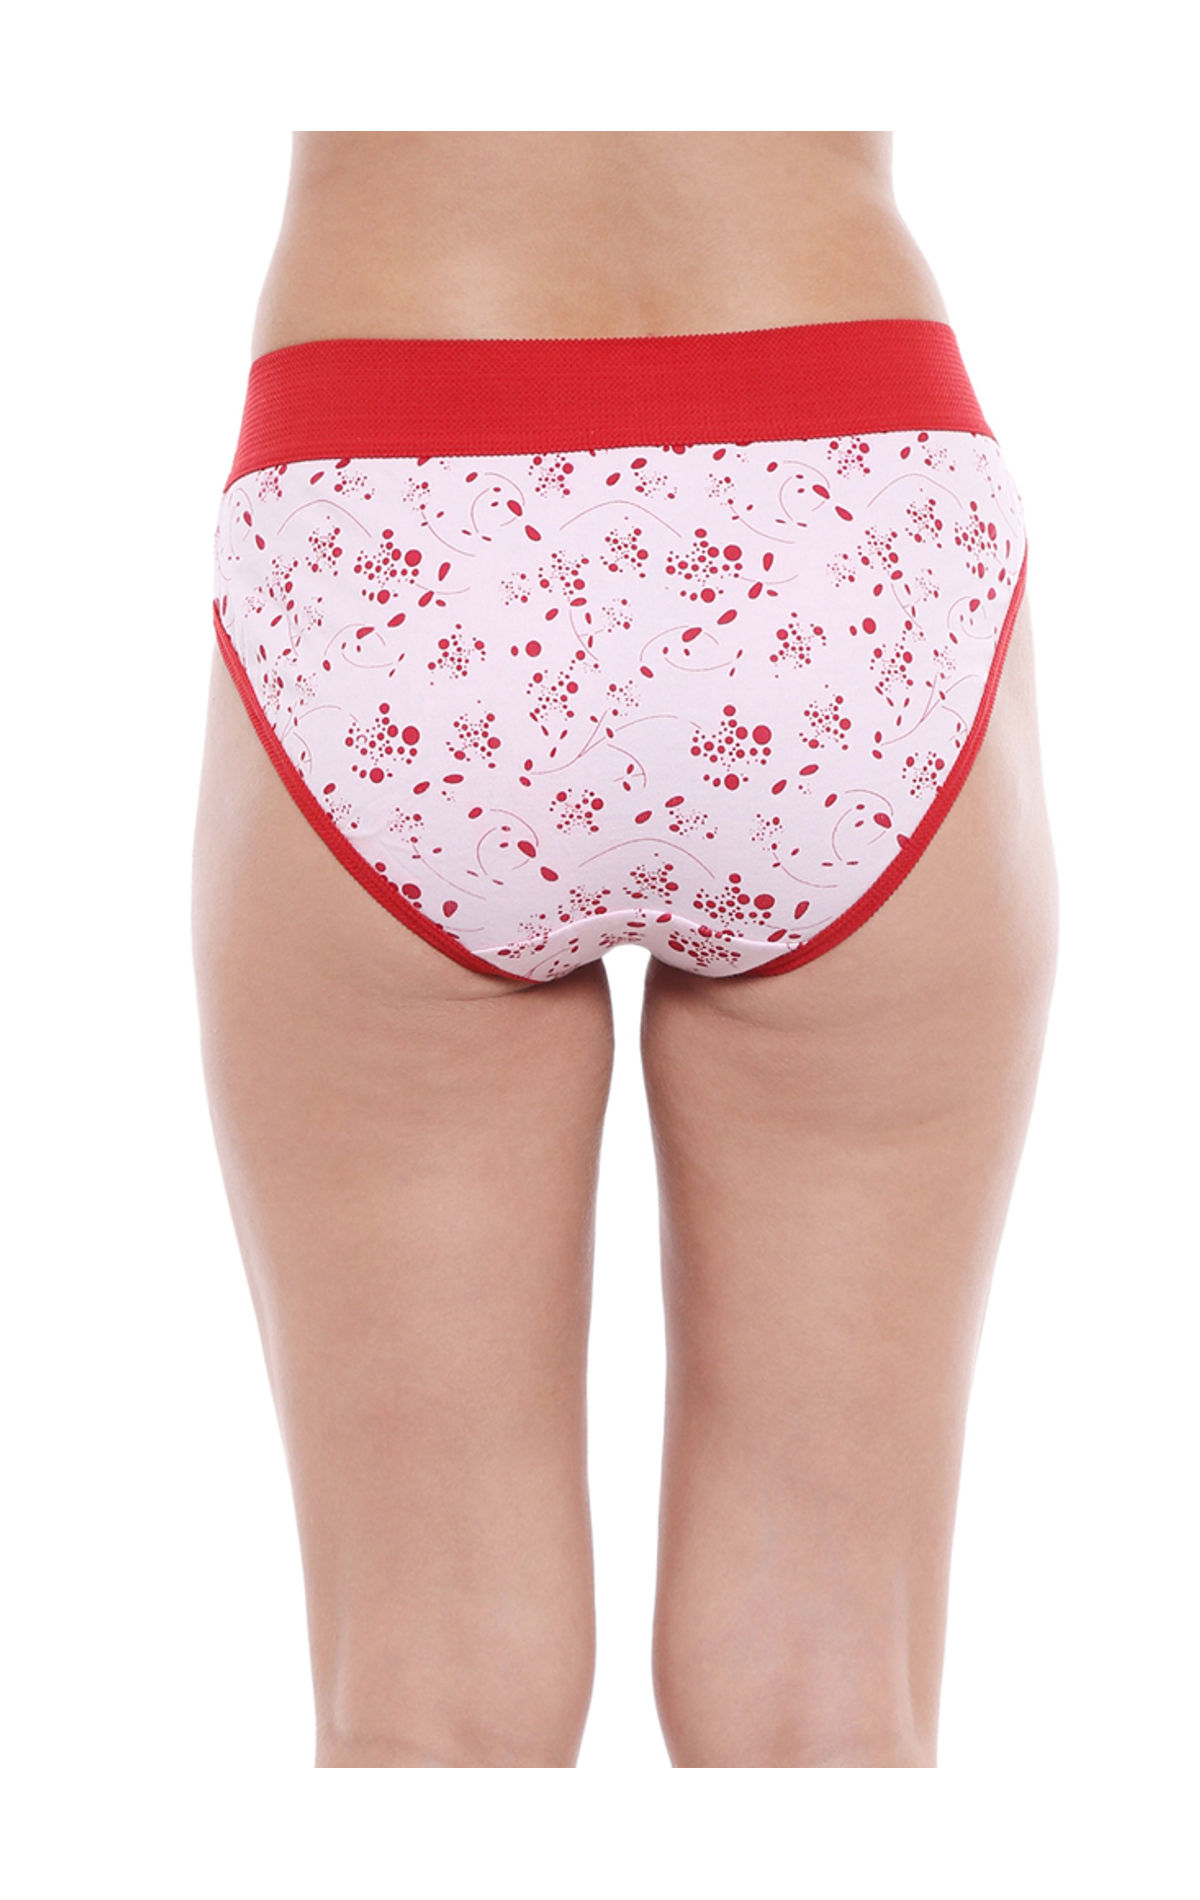 Panties Cotton underwear Combo of 3, Printed, Mid at Rs 28/piece in Delhi